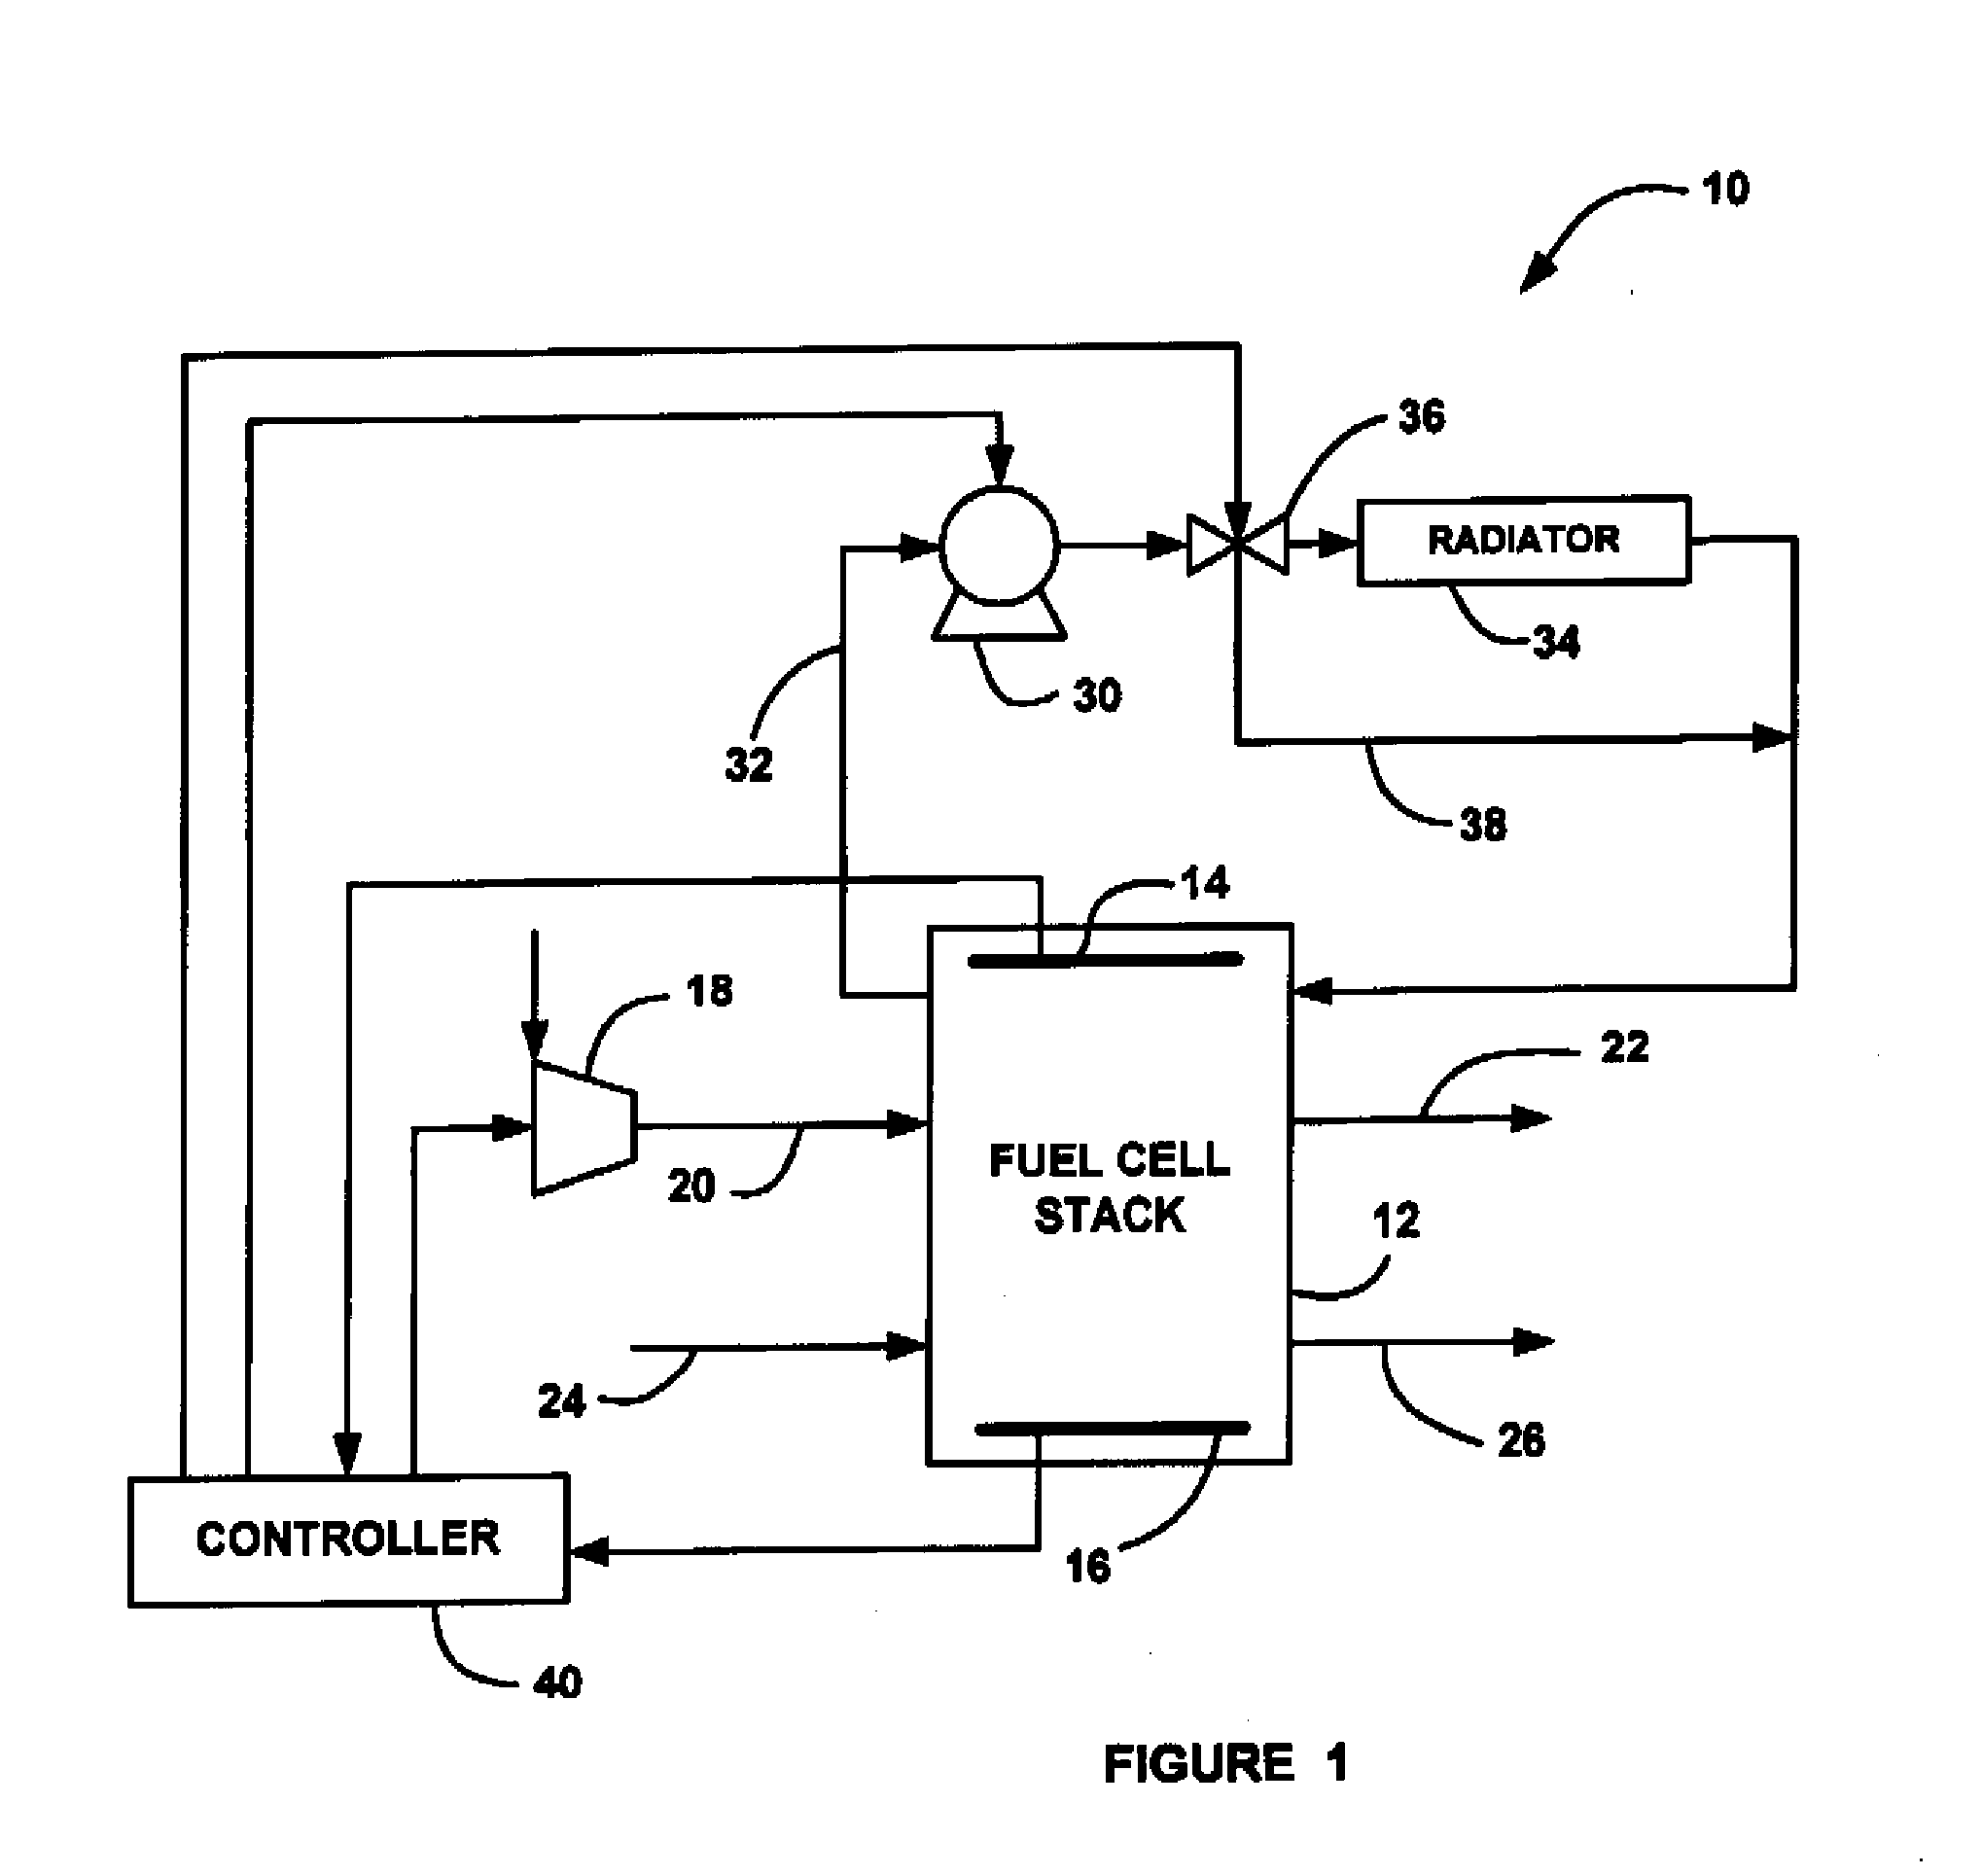 Method for Improving FCS Reliability After End Cell Heater Failure